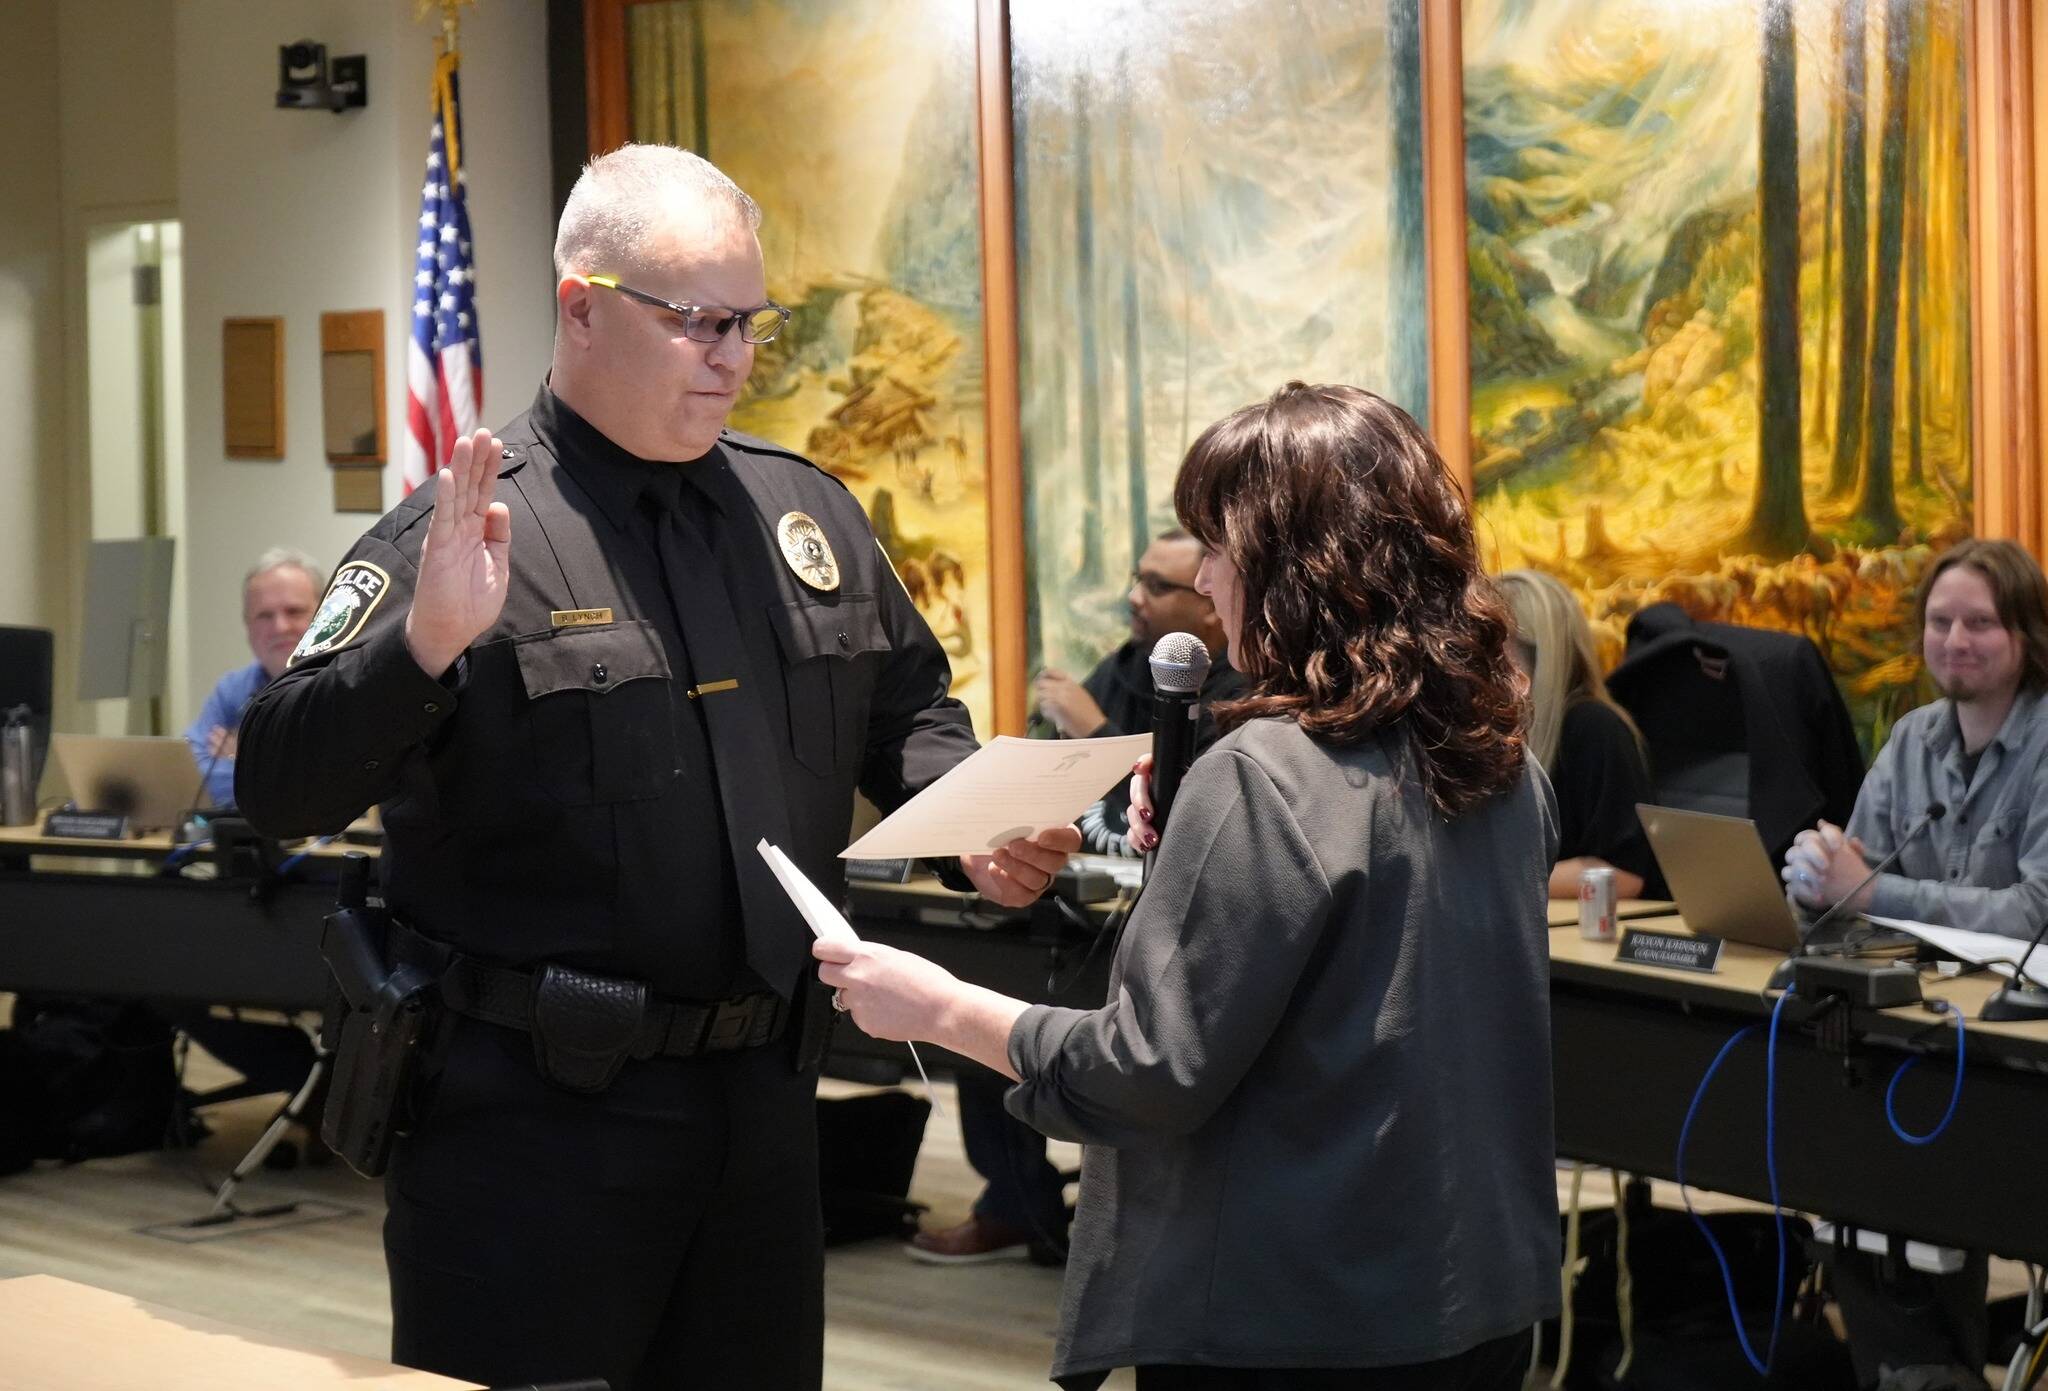 Photo courtesy of the city of Snoqualmie.
Snoqualmie Police Chief Brian Lynch takes his oath of office alongside city clerk Deana Dean at city hall on Nov. 27.